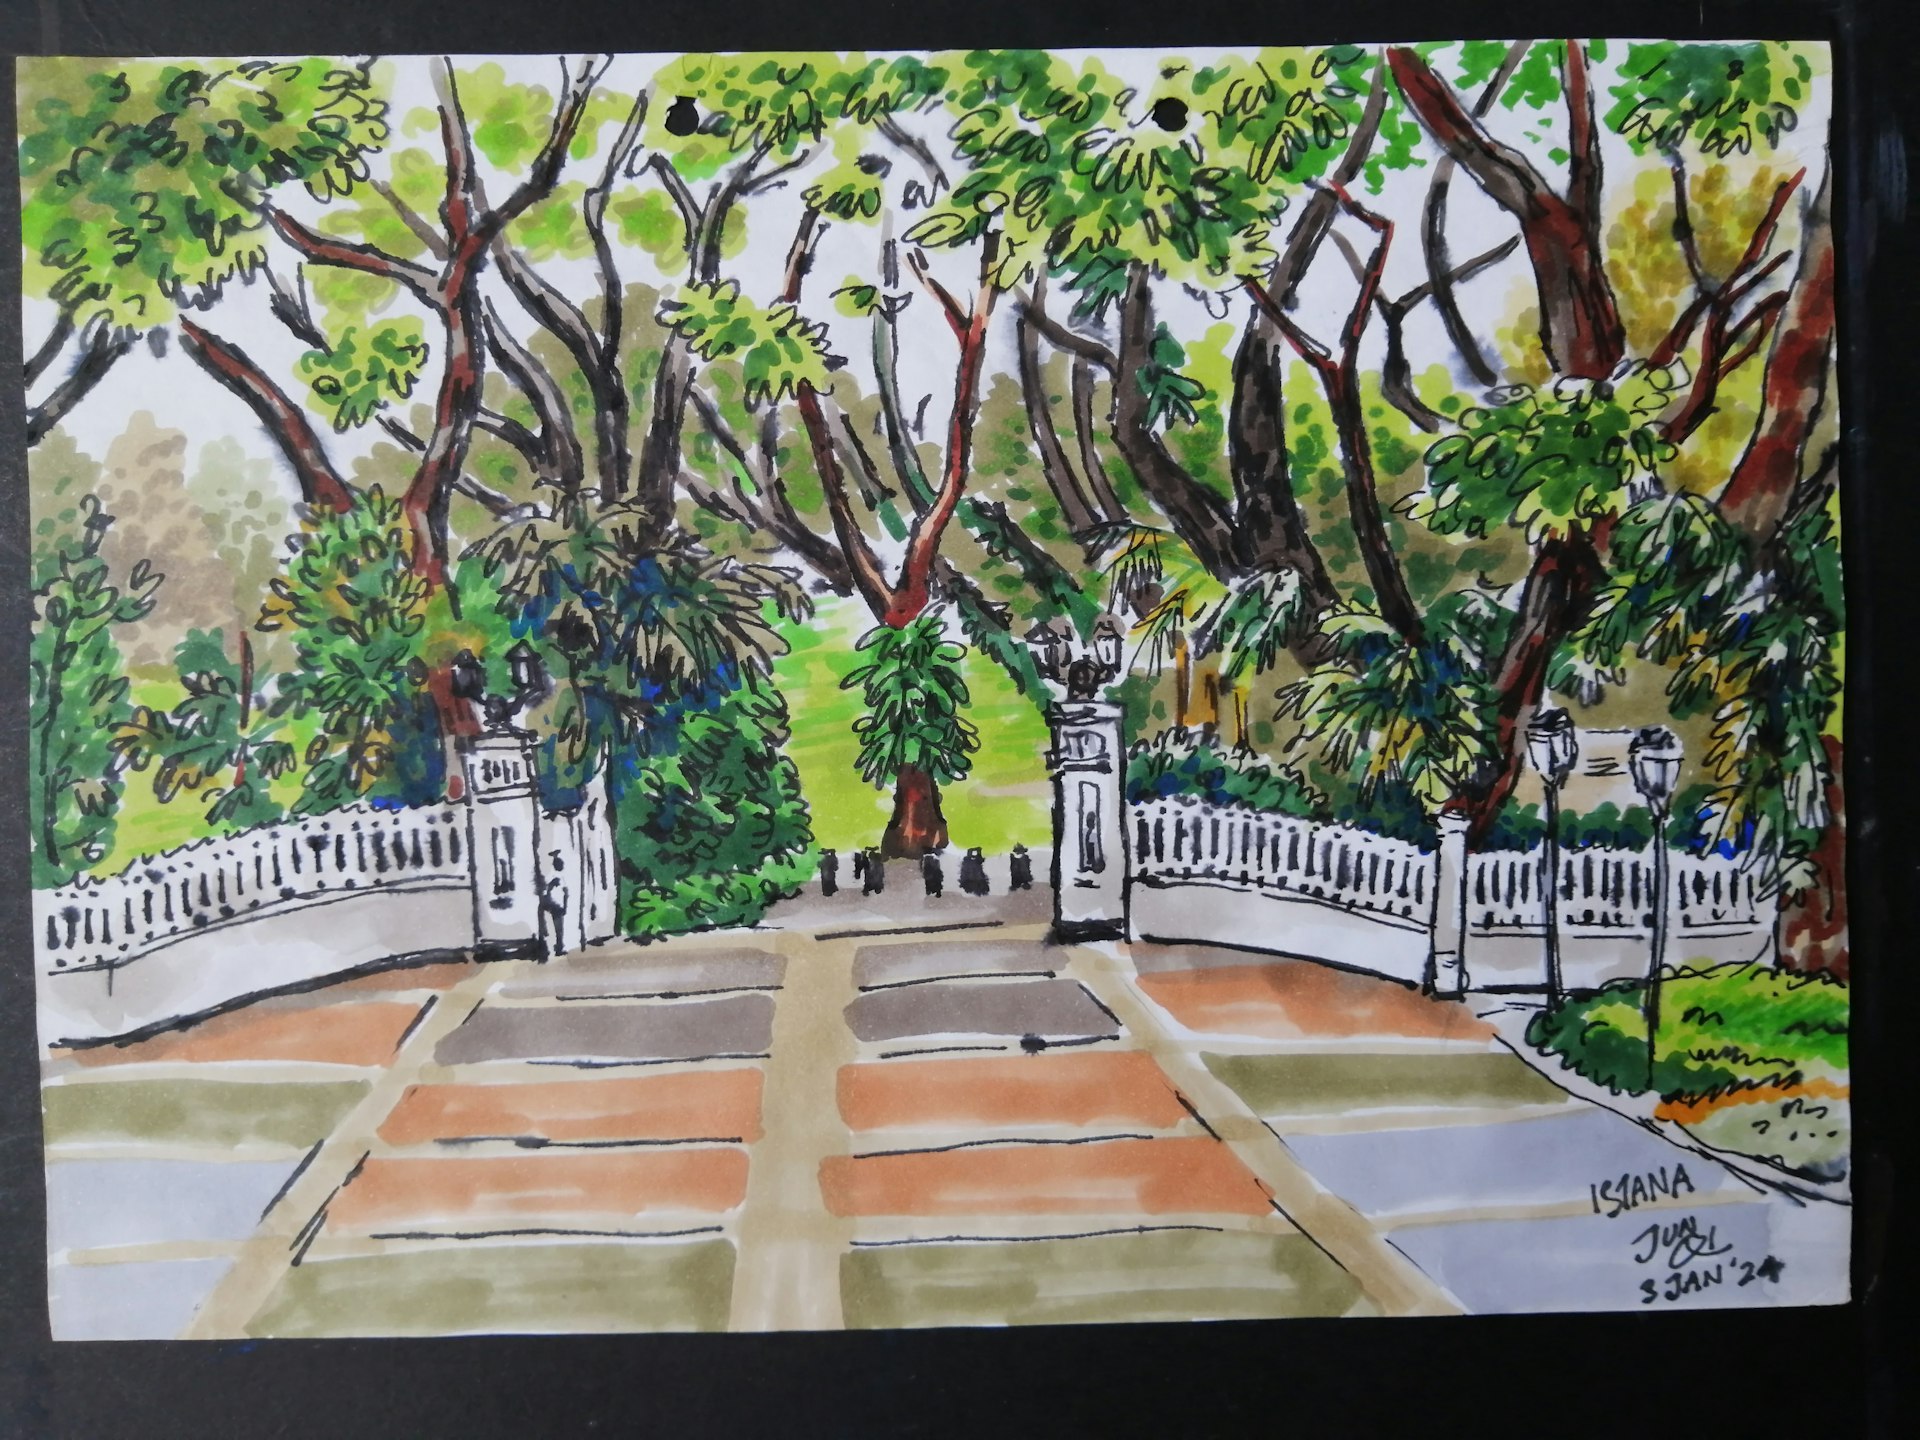 Sketch of the entrance to the Istana